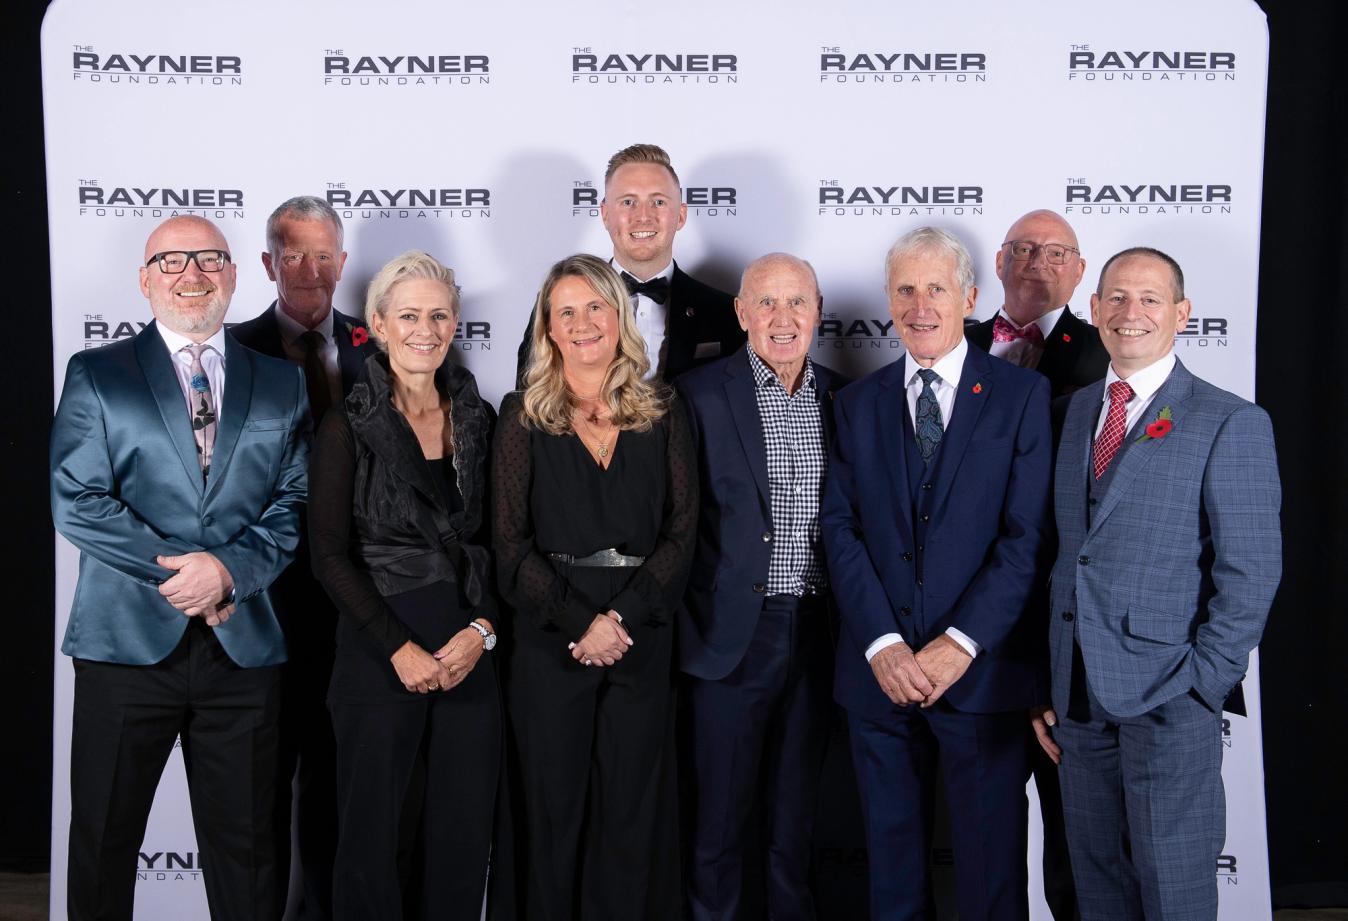 The Rayner Foundation Committee were all smiles as the night went down a storm